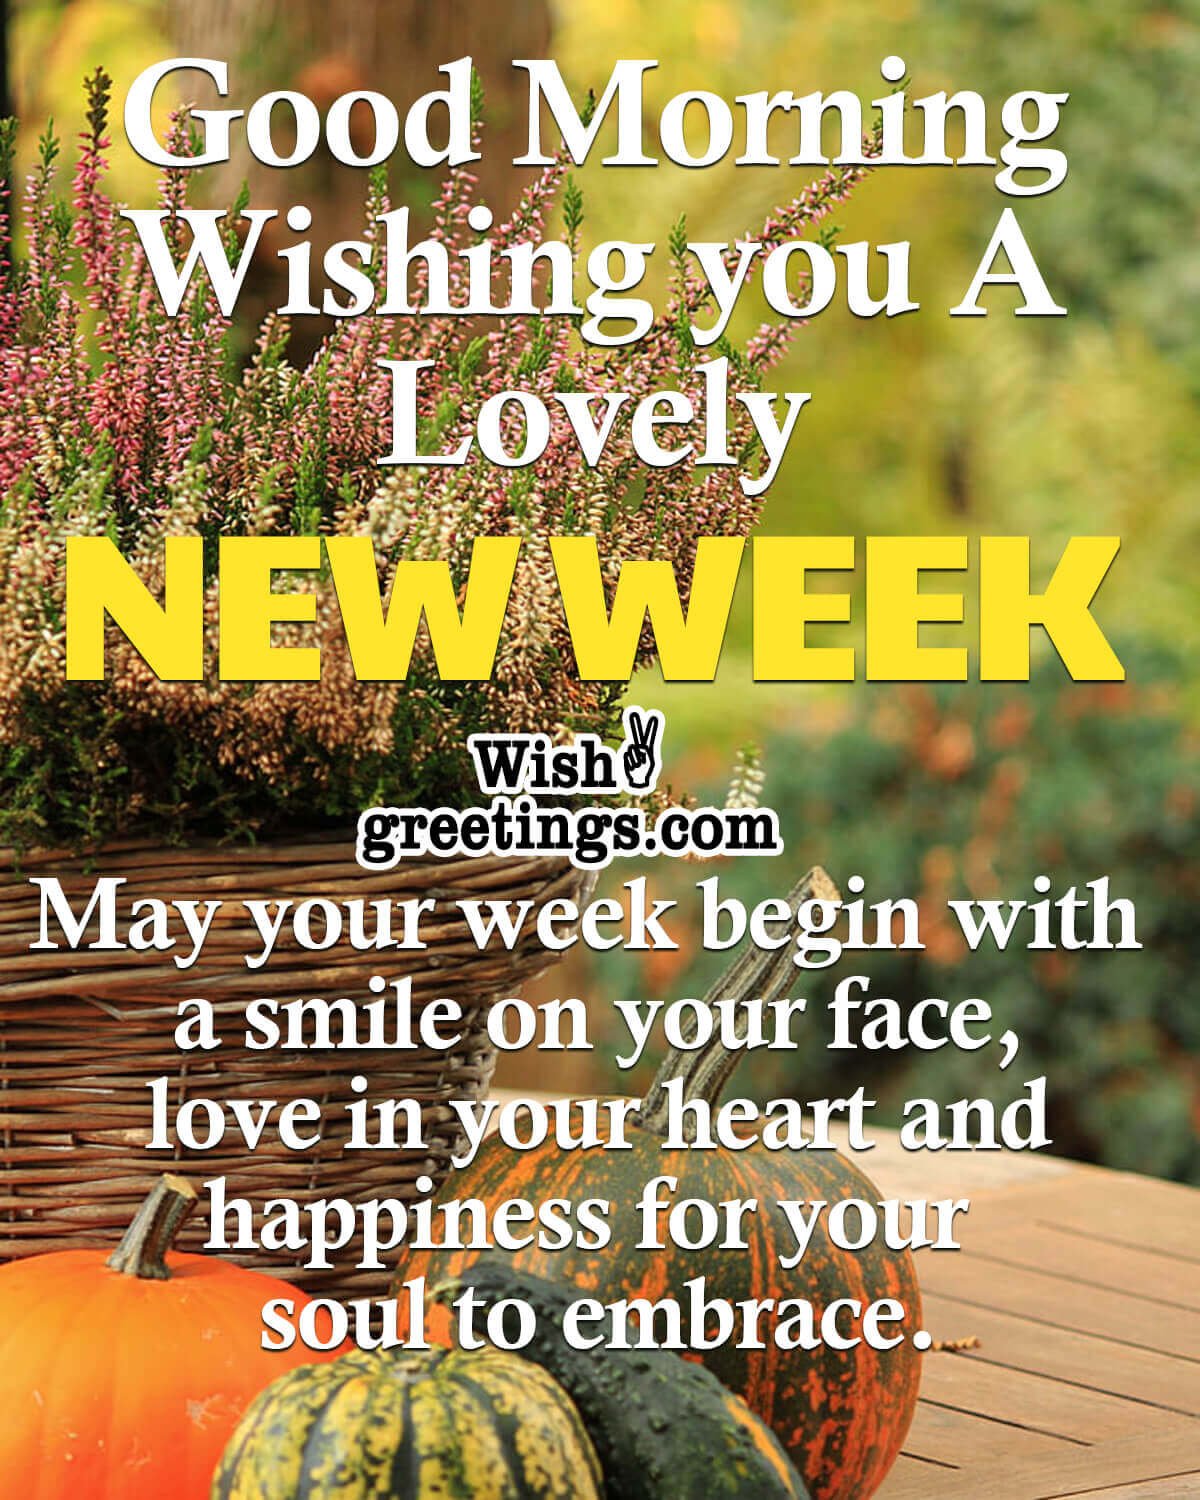 Lovely New Week Message Pic